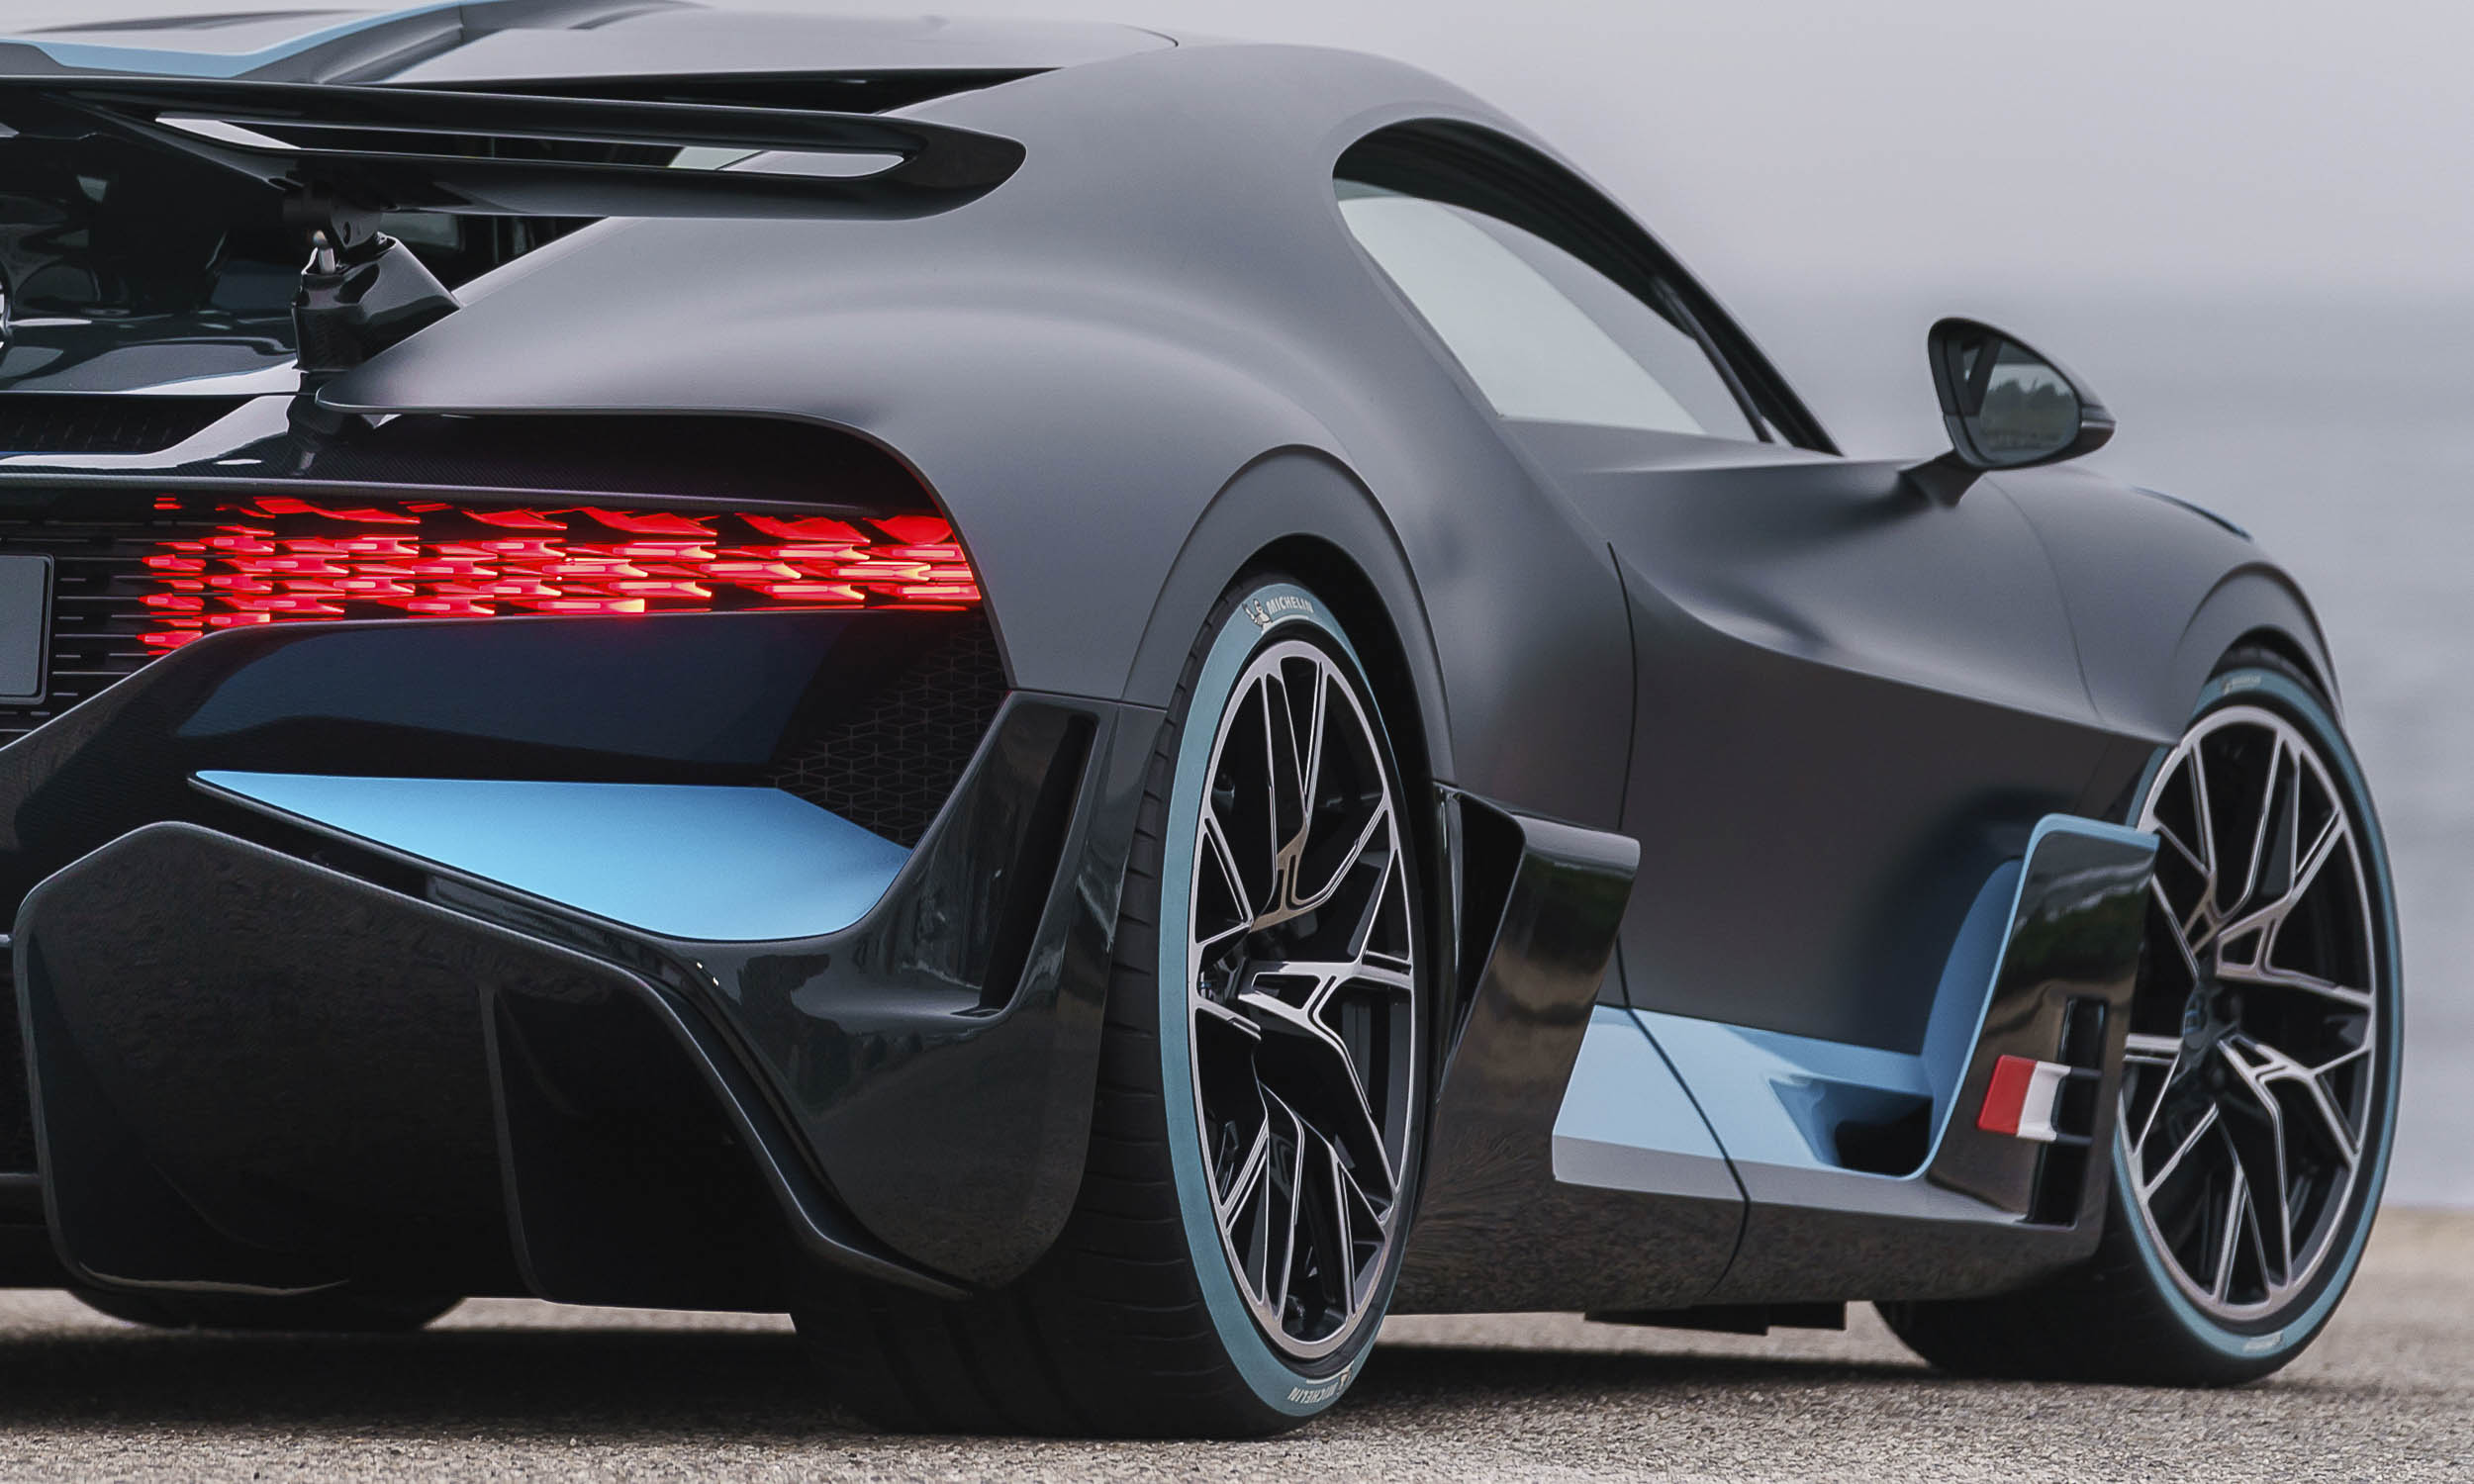 Most Expensive New Cars in America